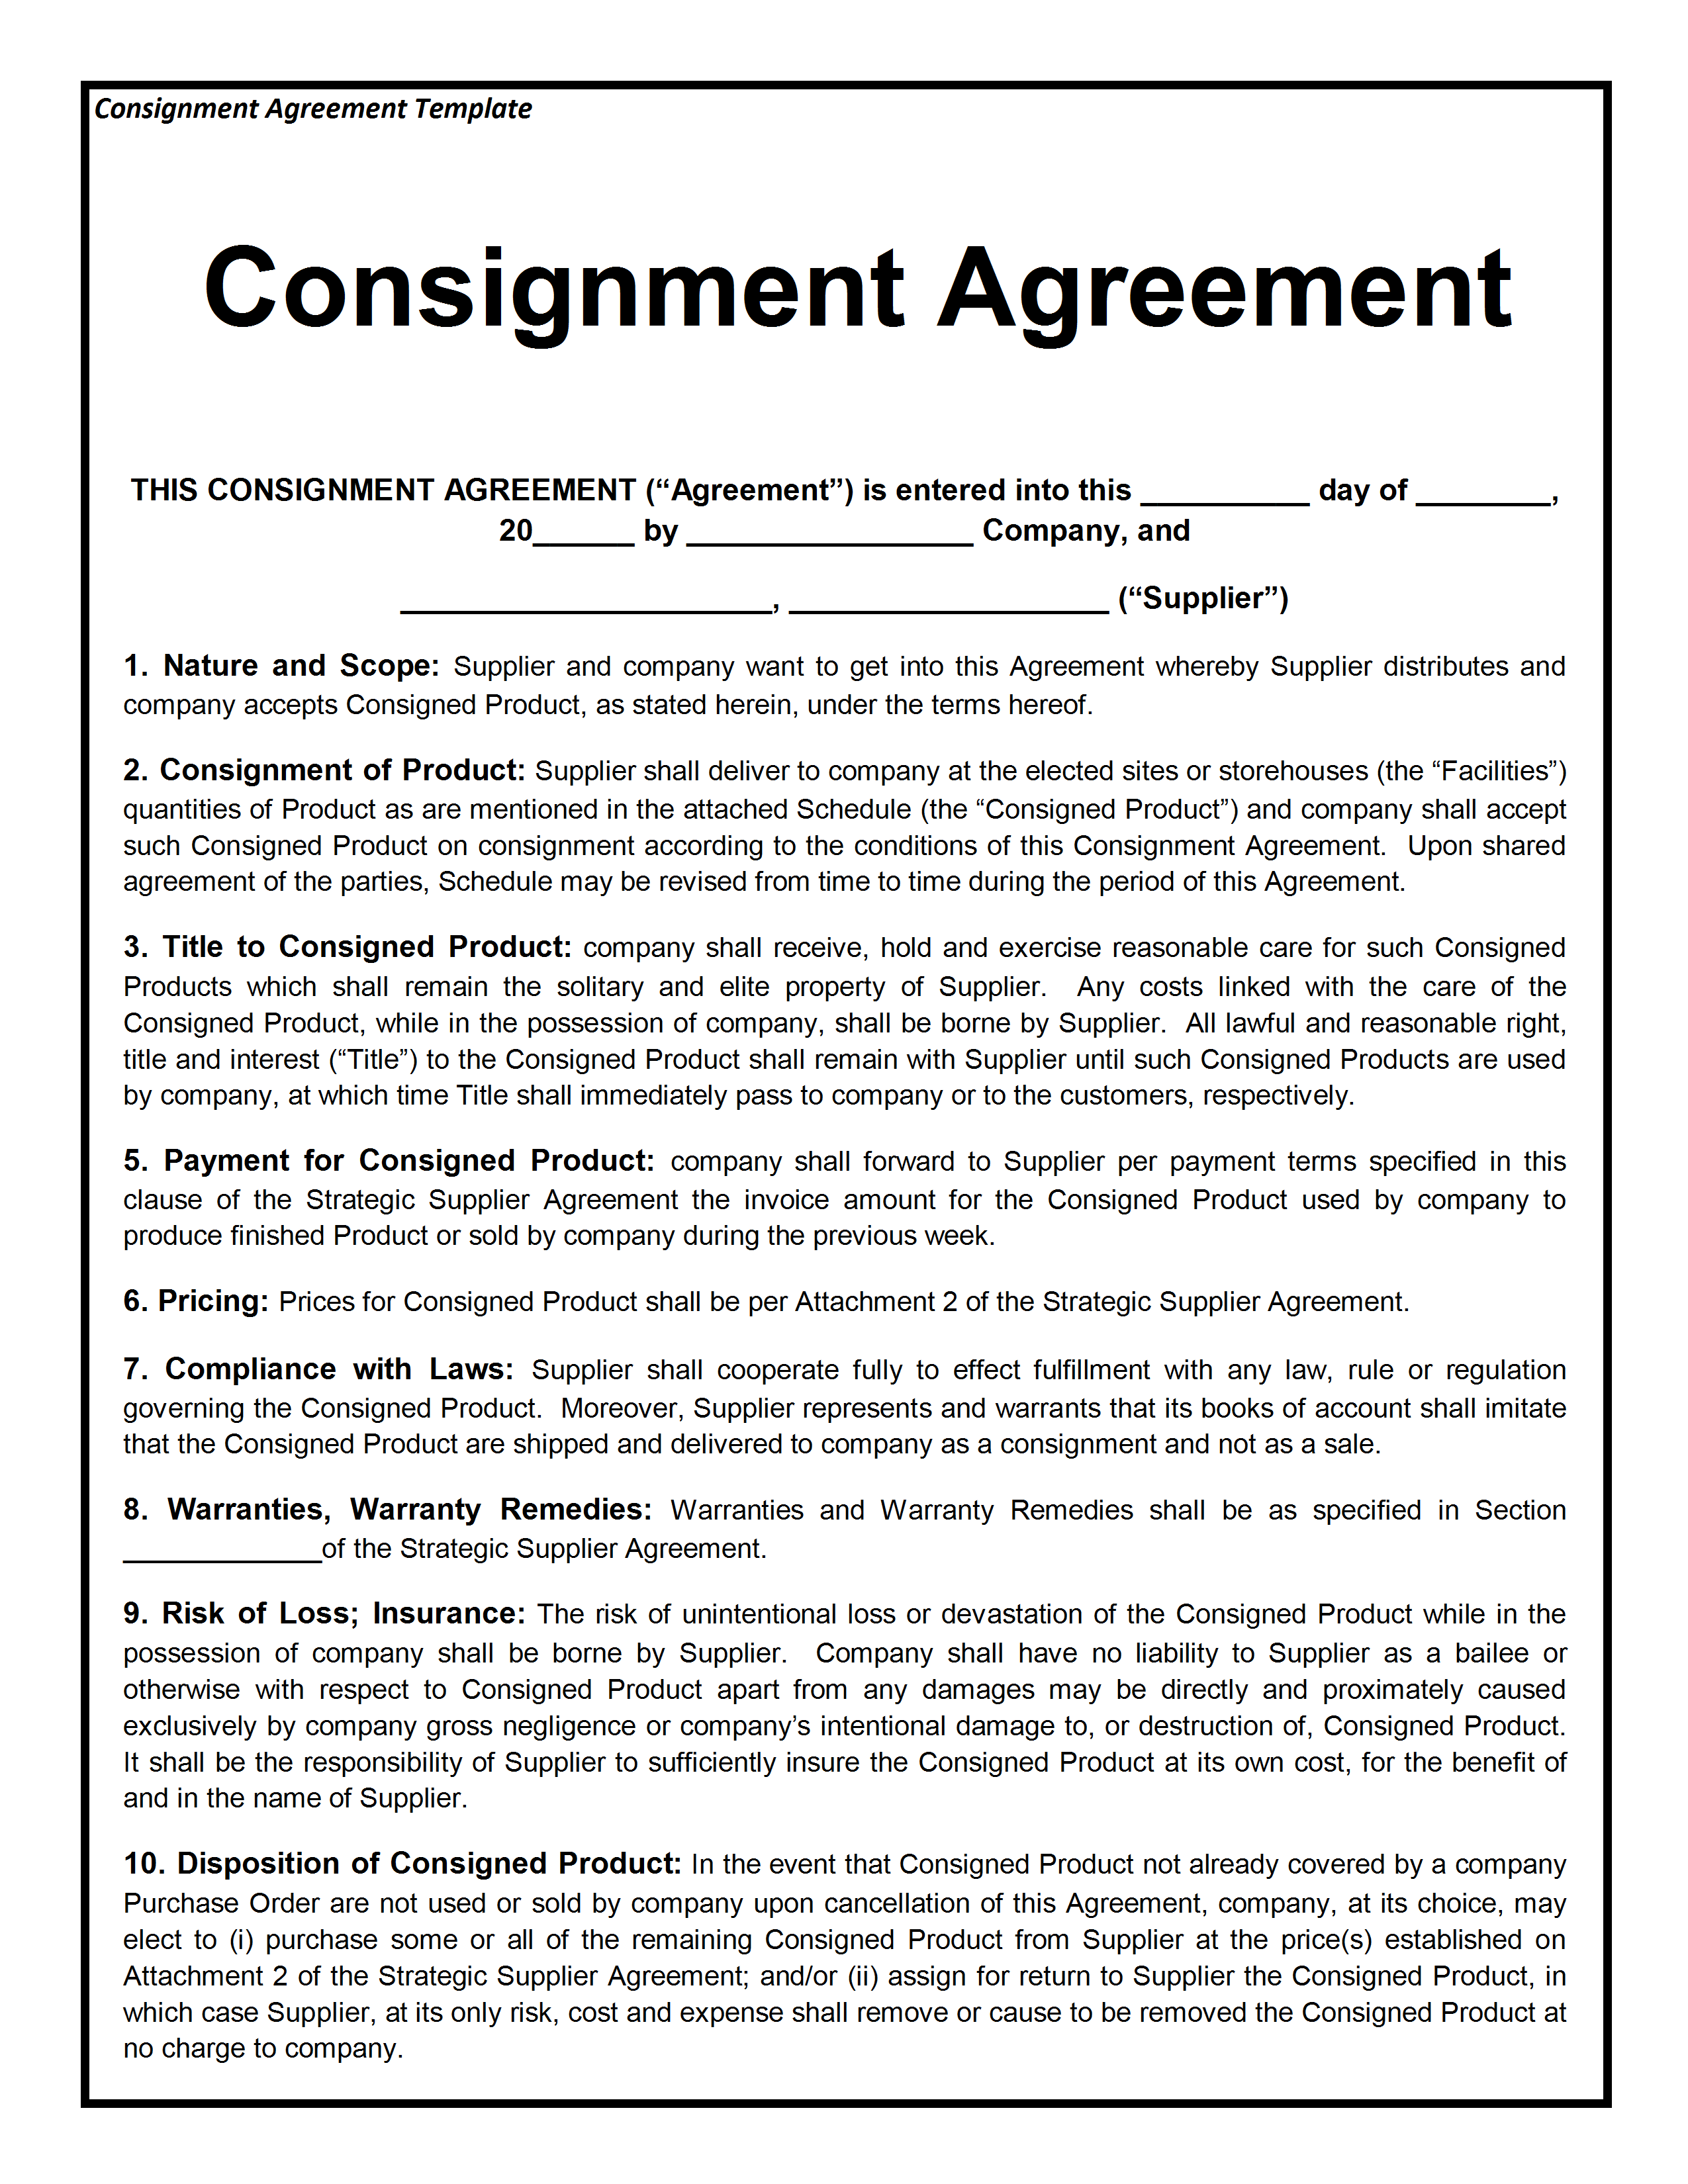 consignment agreement template Ecza.solinf.co